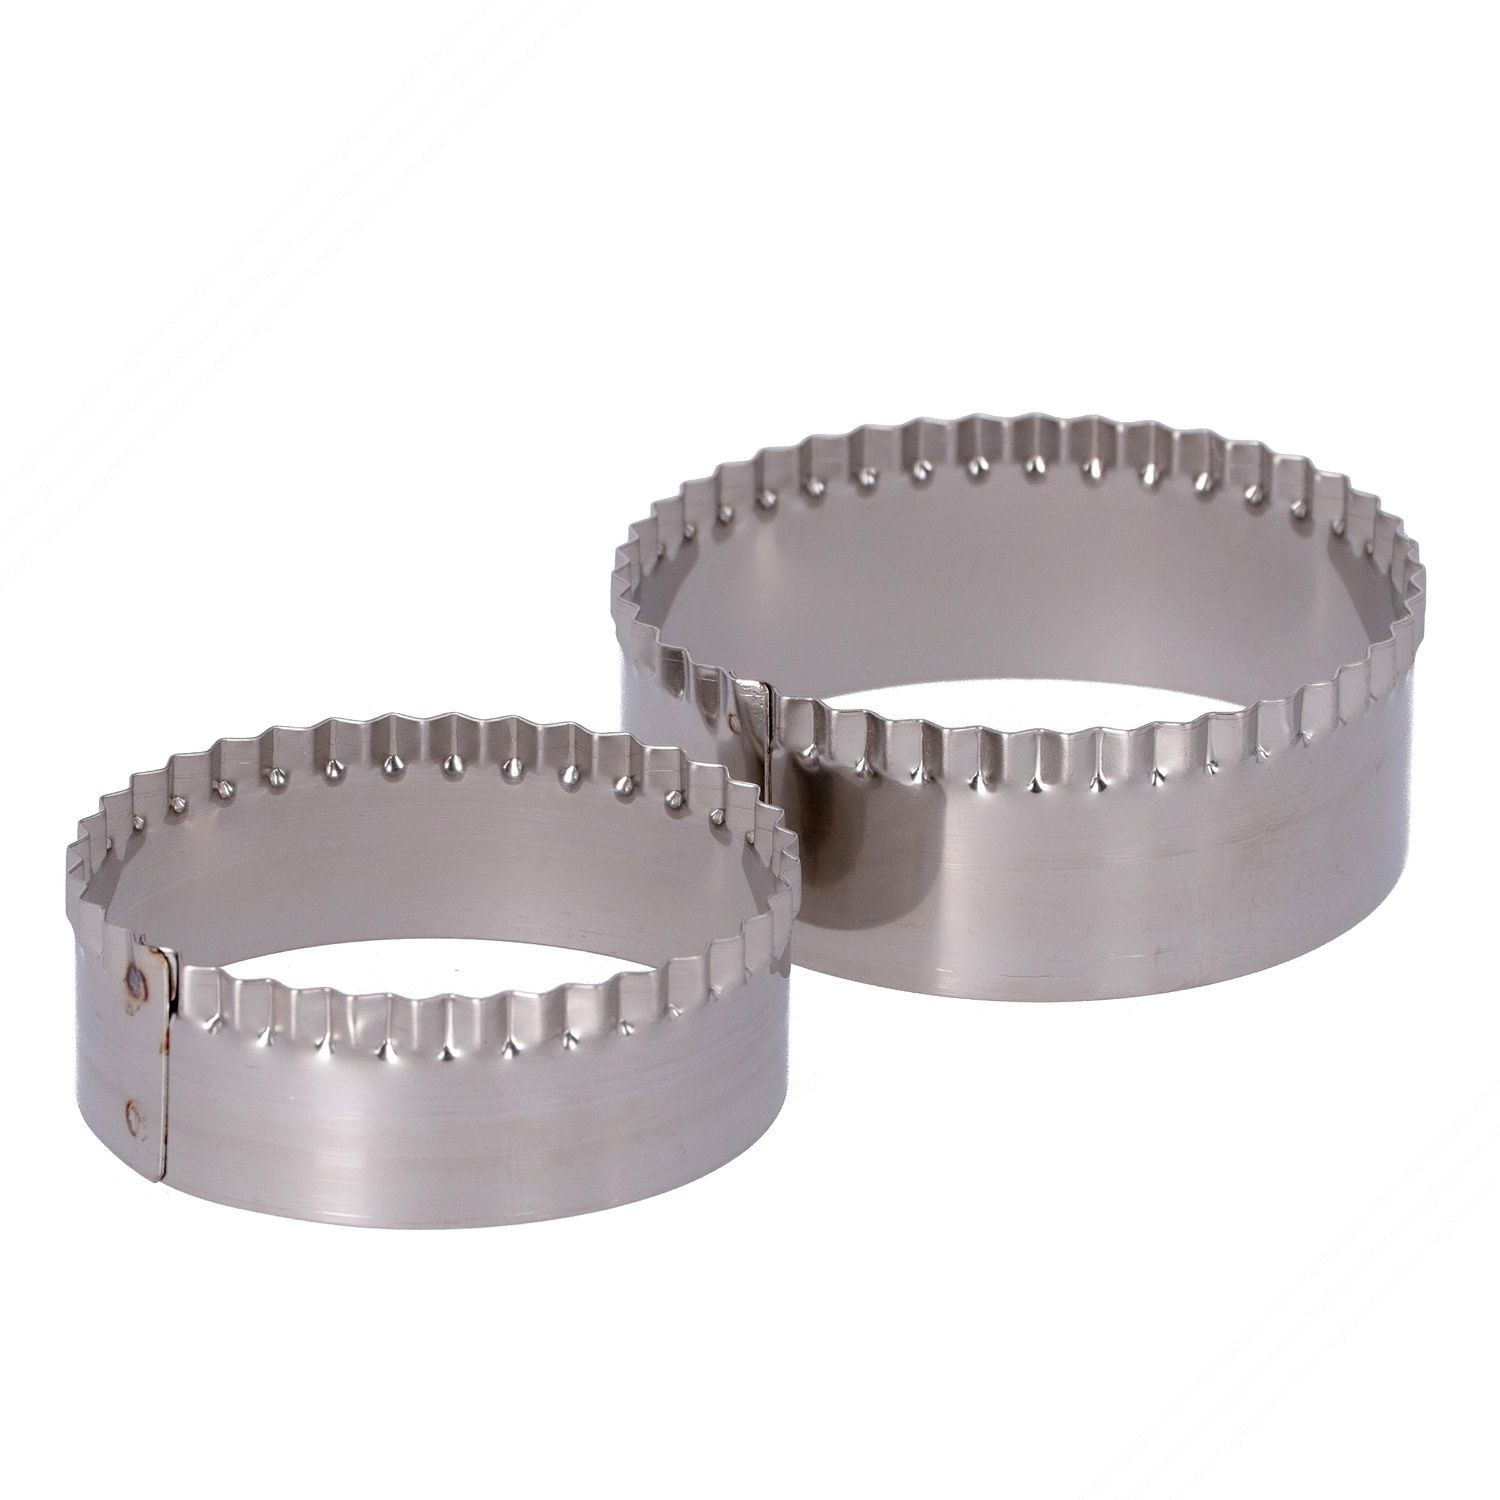 Ring Set with 2 Stainless Steel Rings Without Handle for Cutting Tigella.